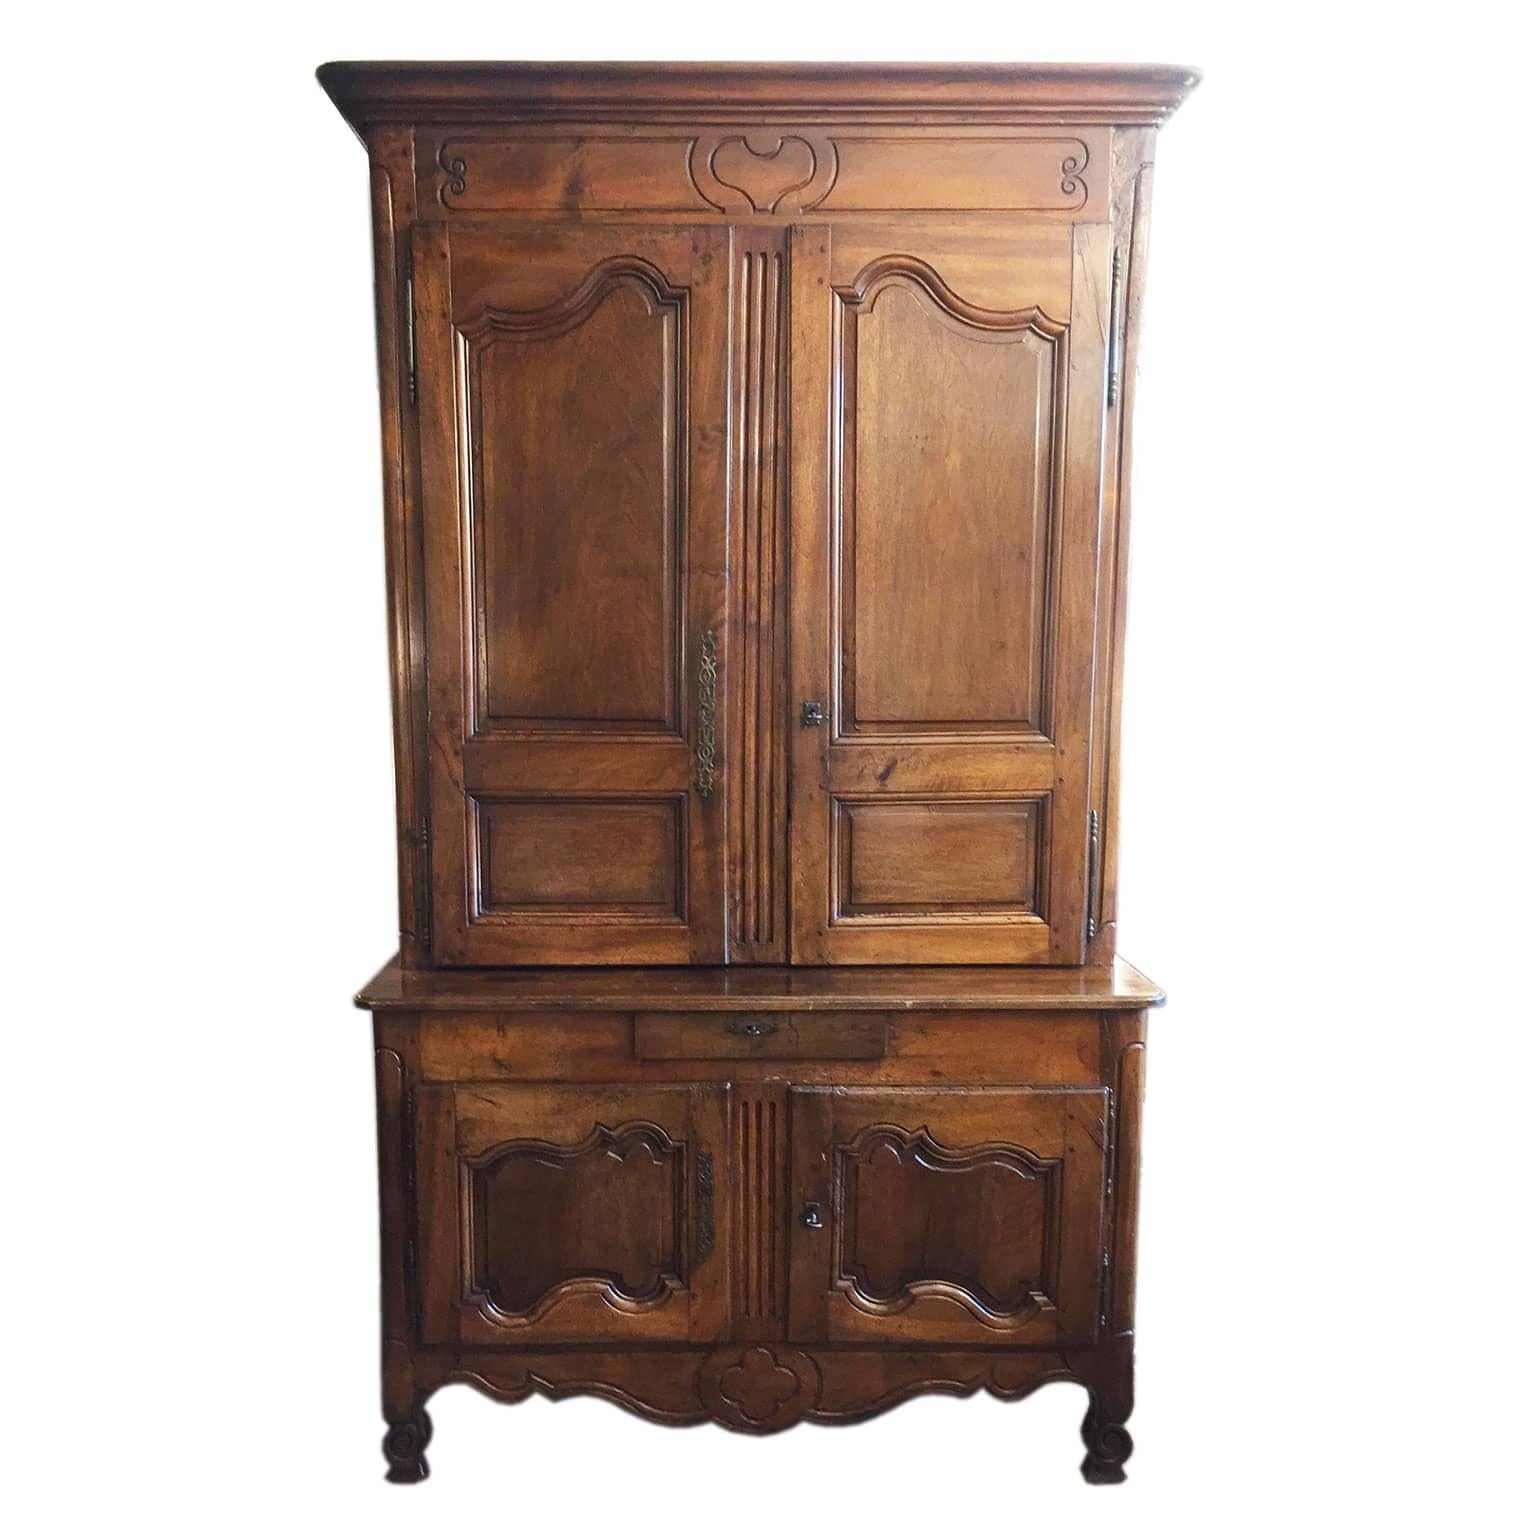 Late 18th century French walnut two-tiered cabinet, with the top cabinet being shallowing than the bottom cabinet, an antique hand-carved two-door buffet from Provence, total height 101.19 inches, 257 centimeters. 
Large Louis XV chestnut buffet a